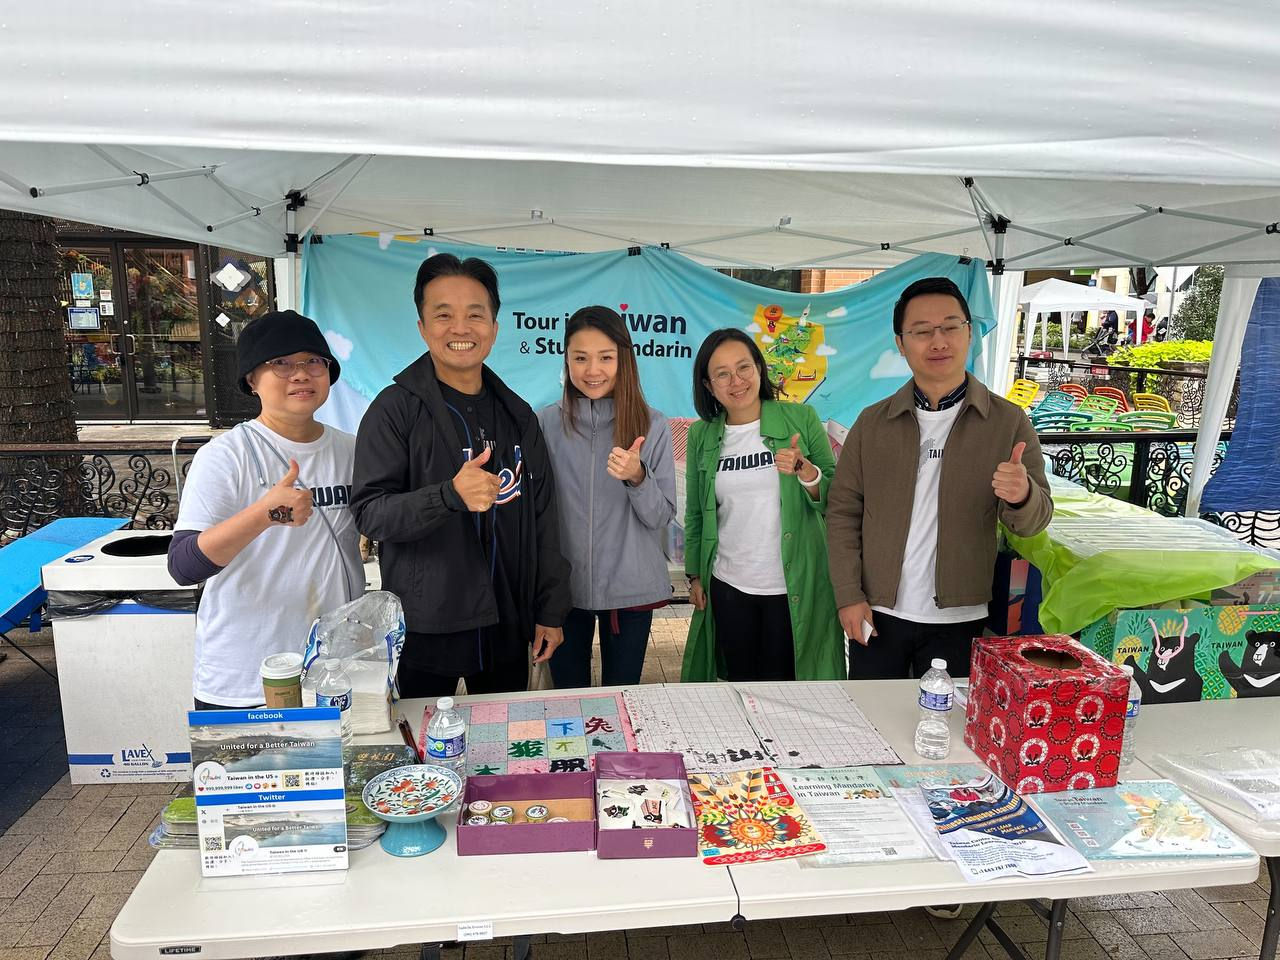 Real Success made to tantalize Locals to study in Taiwan   in the Bubble Tea Festival at Rockville